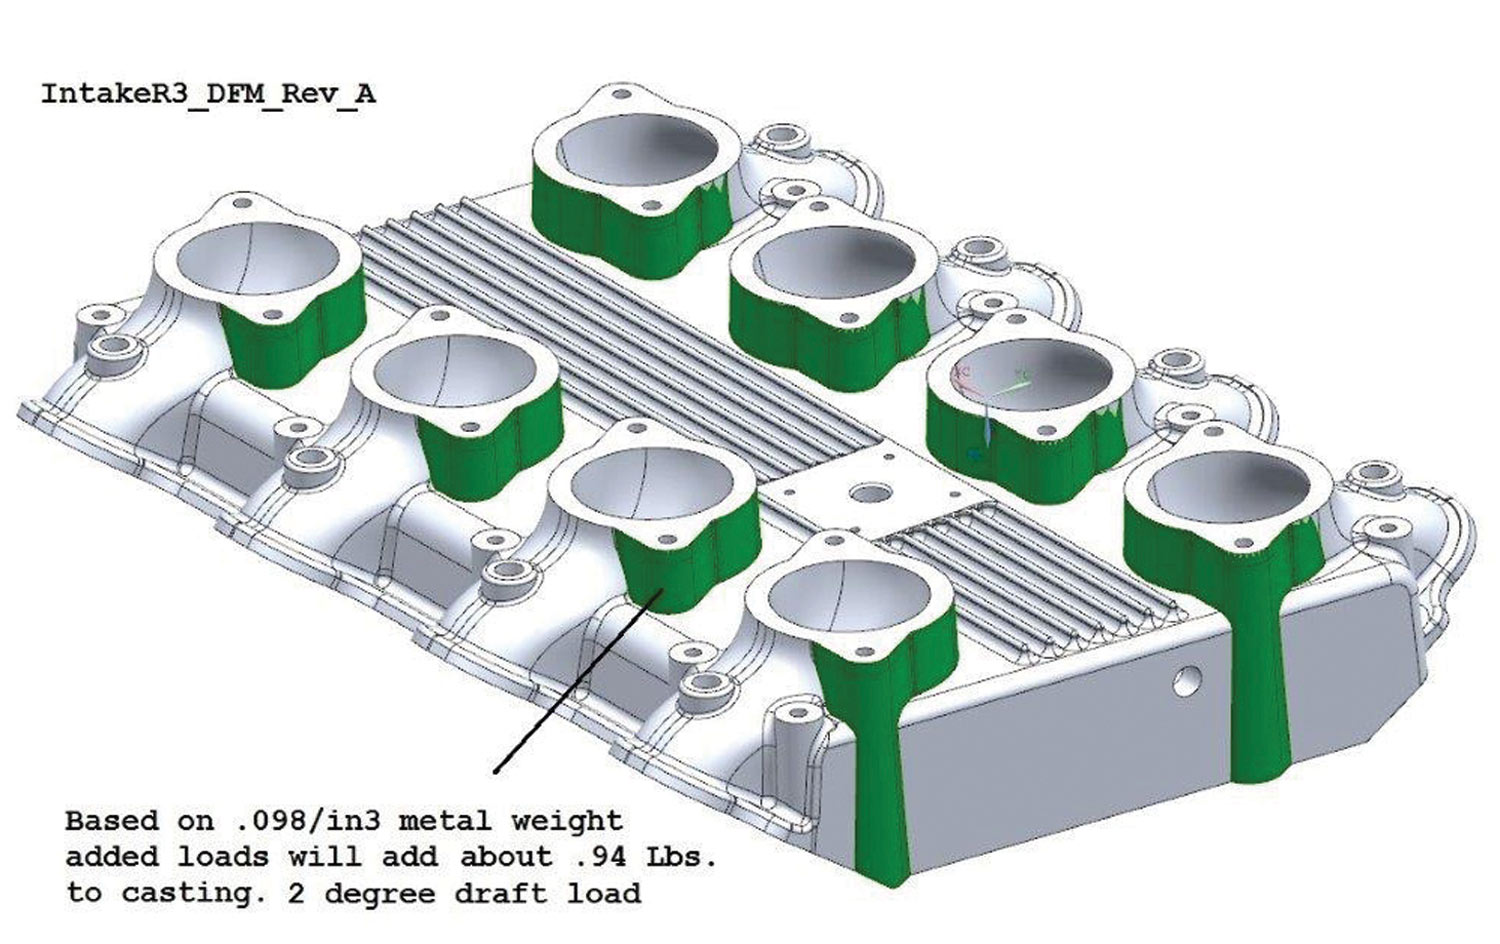 a CAD modeled by JHRS of the intake manifold and all the injection system components